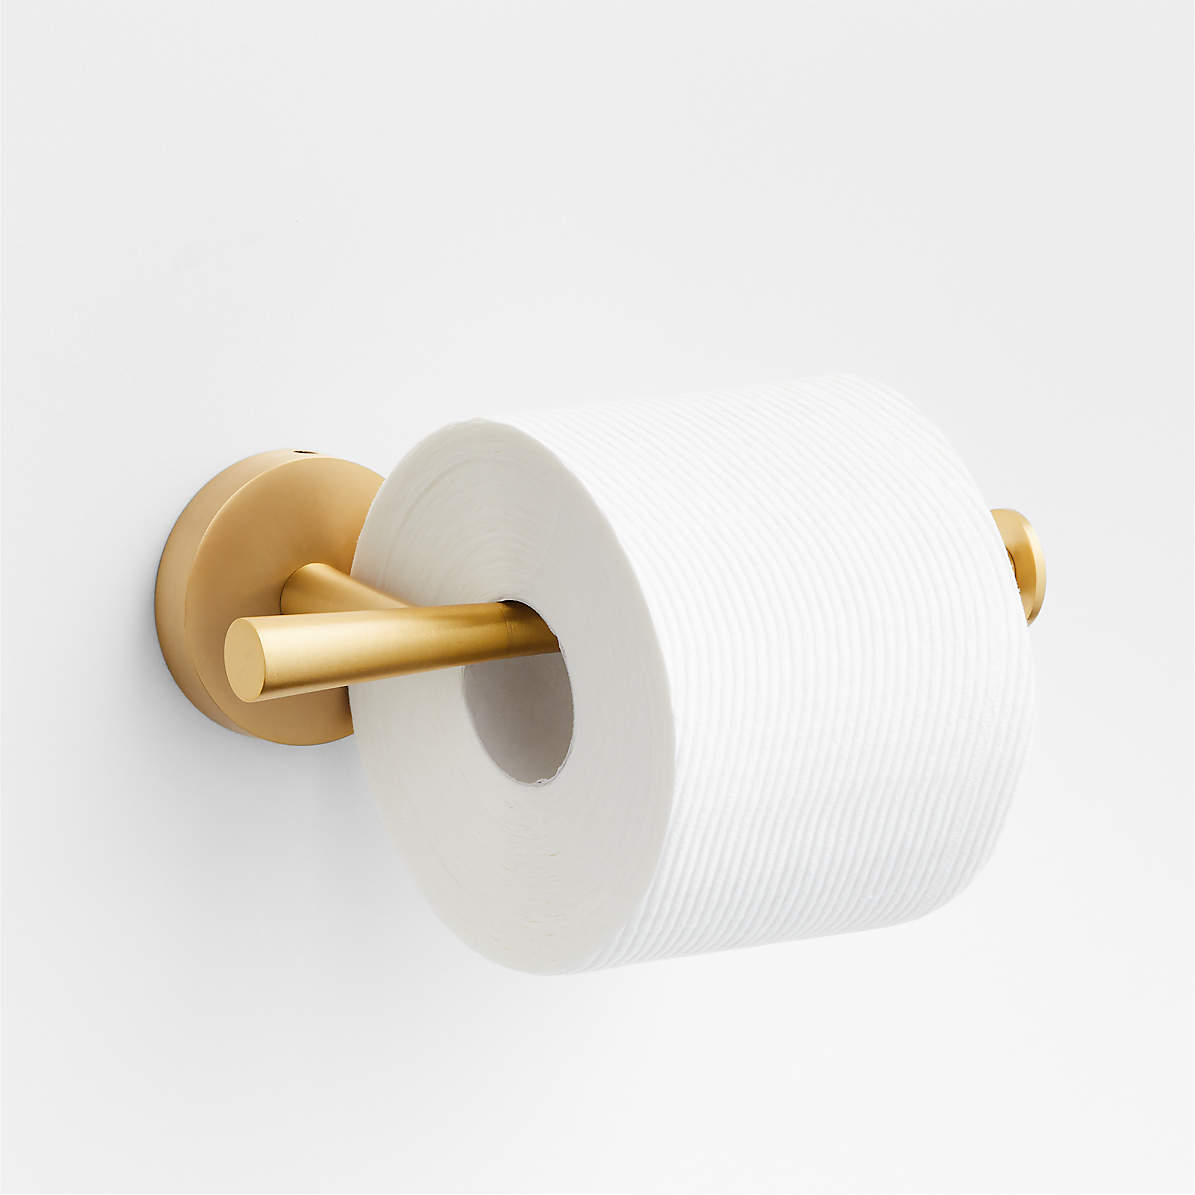 Hex Brass Wall Mounted Toilet Paper Holder + Reviews